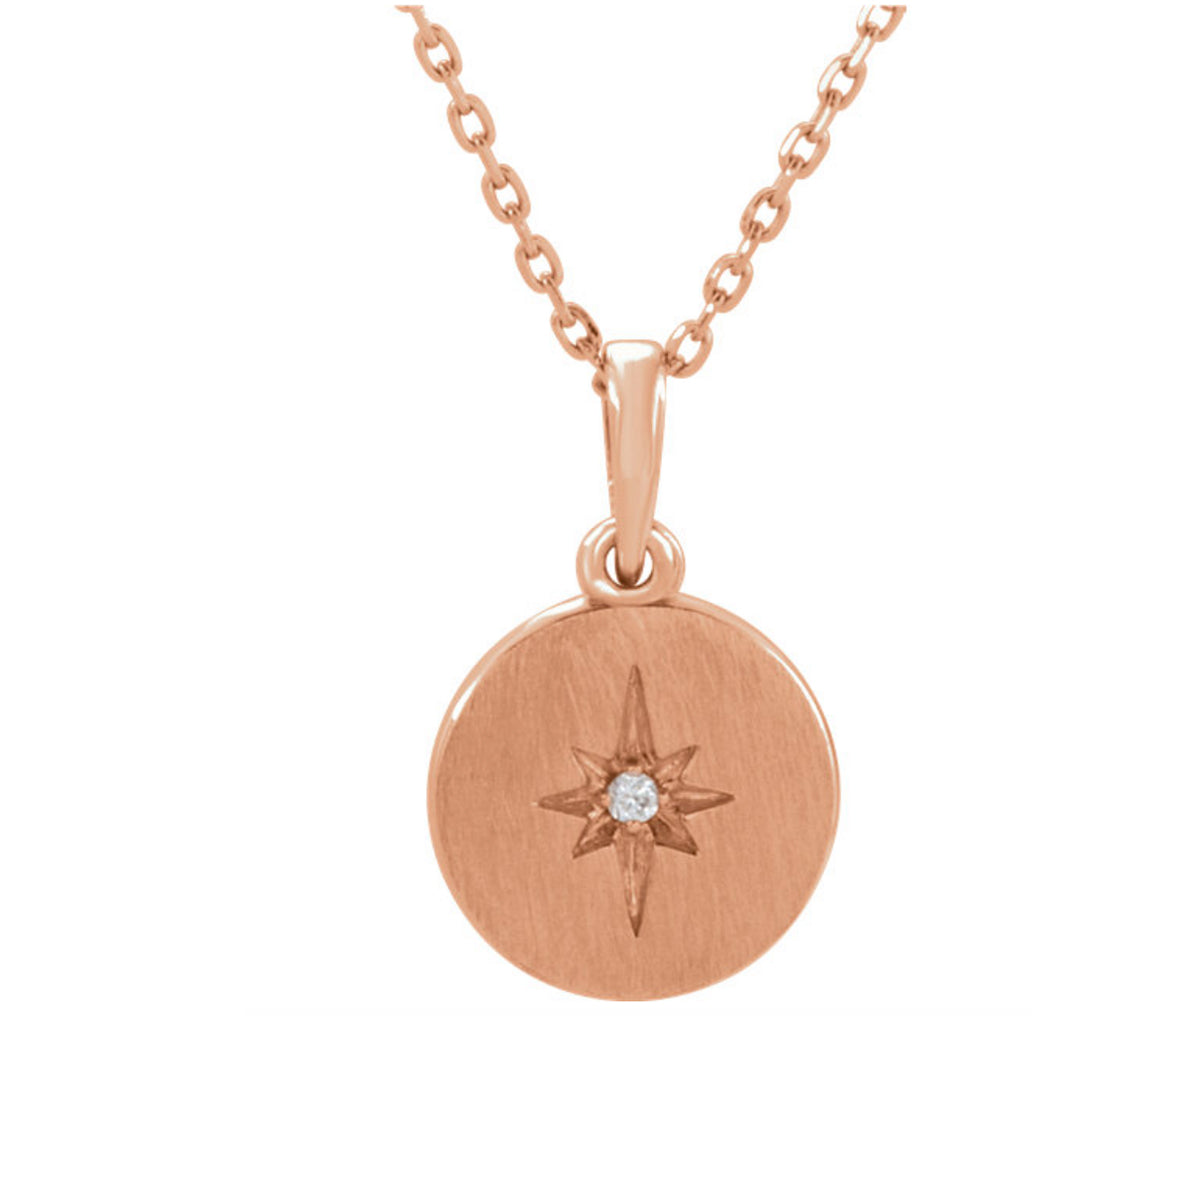 Diamond Starburst Necklace in Gold, Platinum or Sterling Silver - Talisman Collection Fine Jewelers